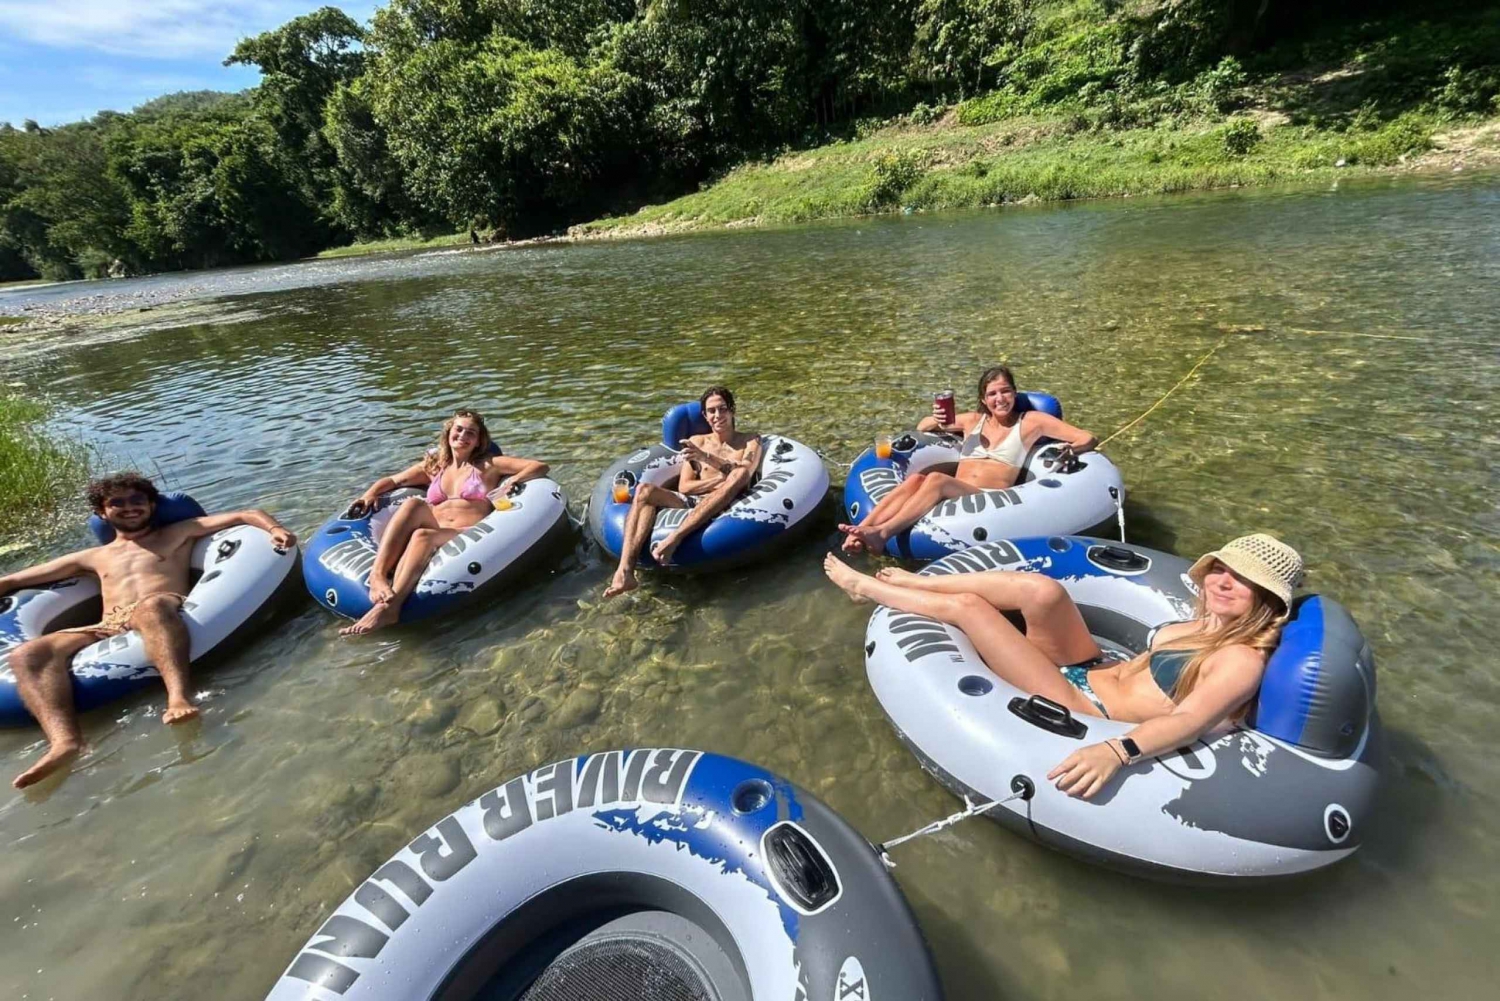 Tubing in the River (nothing included)